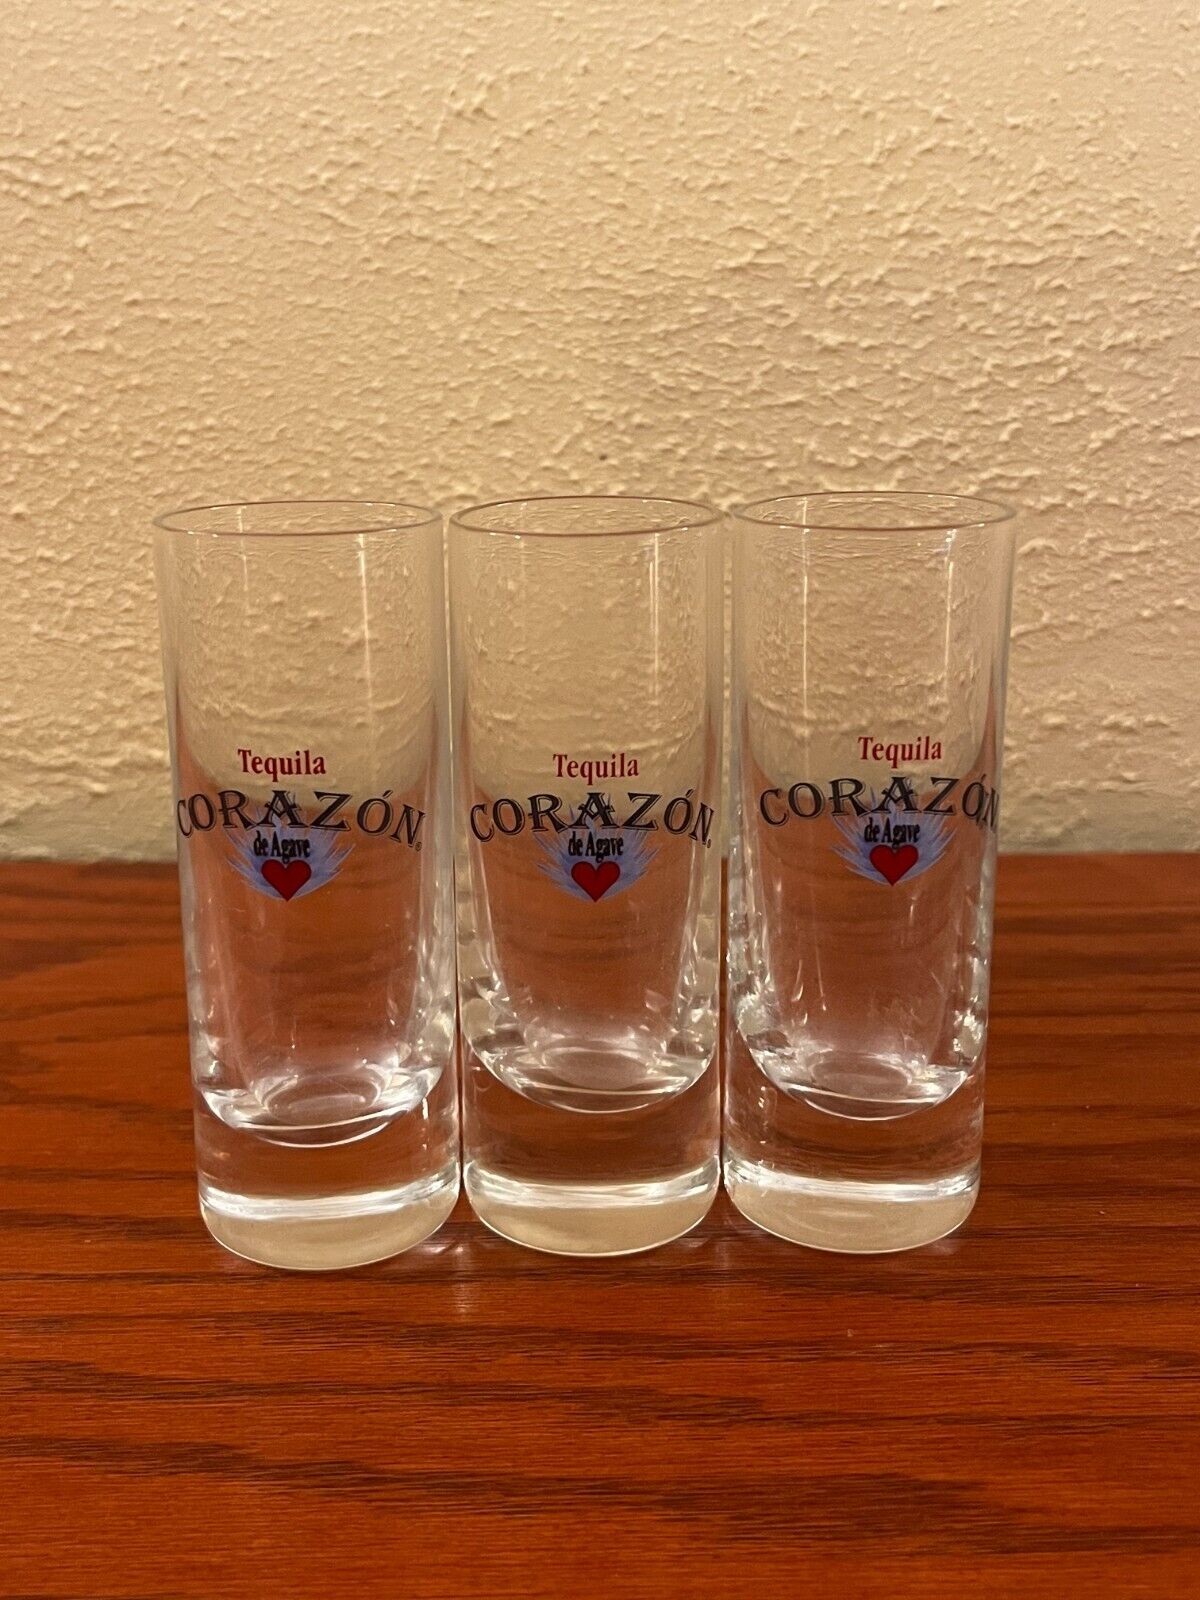 Tequila Corazon de Agave Tall Shot Glass Great Condition 4.25 Spirit Collectable